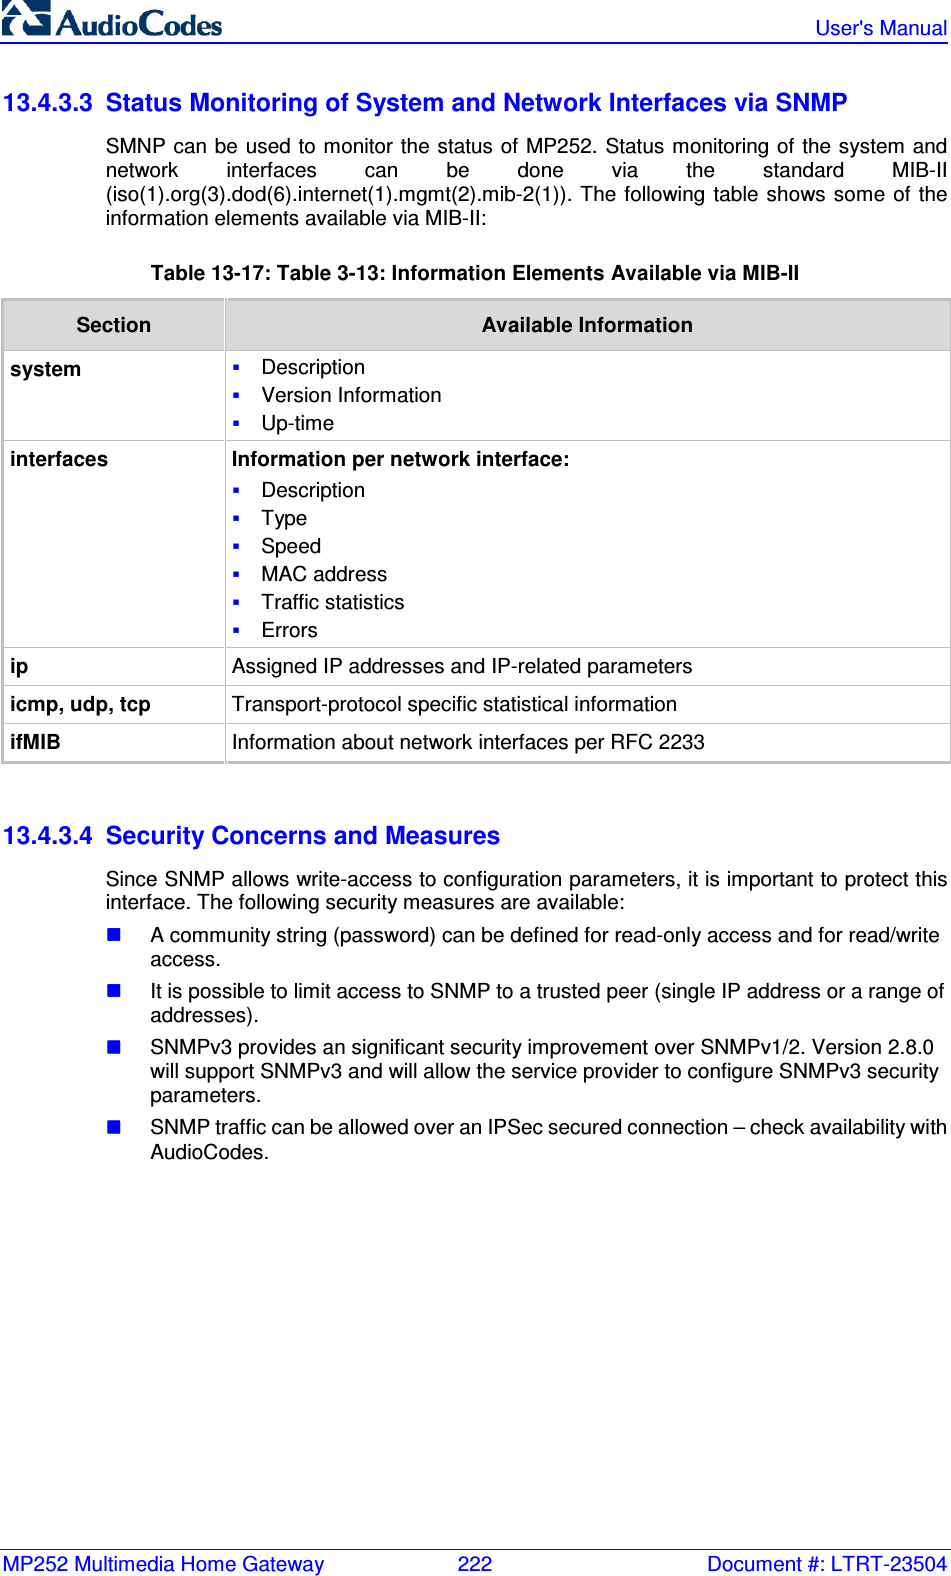 MP252 Multimedia Home Gateway  222  Document #: LTRT-23504   User&apos;s Manual  13.4.3.3  Status Monitoring of System and Network Interfaces via SNMP SMNP can be used to monitor the status of MP252. Status monitoring of the system and network  interfaces  can  be  done  via  the  standard  MIB-II (iso(1).org(3).dod(6).internet(1).mgmt(2).mib-2(1)). The  following  table shows some  of the information elements available via MIB-II: Table 13-17: Table  3-13: Information Elements Available via MIB-II Section  Available Information system  Description  Version Information  Up-time interfaces Information per network interface:  Description  Type  Speed  MAC address  Traffic statistics  Errors ip Assigned IP addresses and IP-related parameters icmp, udp, tcp Transport-protocol specific statistical information ifMIB Information about network interfaces per RFC 2233   13.4.3.4  Security Concerns and Measures Since SNMP allows write-access to configuration parameters, it is important to protect this interface. The following security measures are available:  A community string (password) can be defined for read-only access and for read/write access.  It is possible to limit access to SNMP to a trusted peer (single IP address or a range of addresses).  SNMPv3 provides an significant security improvement over SNMPv1/2. Version 2.8.0 will support SNMPv3 and will allow the service provider to configure SNMPv3 security parameters.  SNMP traffic can be allowed over an IPSec secured connection – check availability with AudioCodes. 